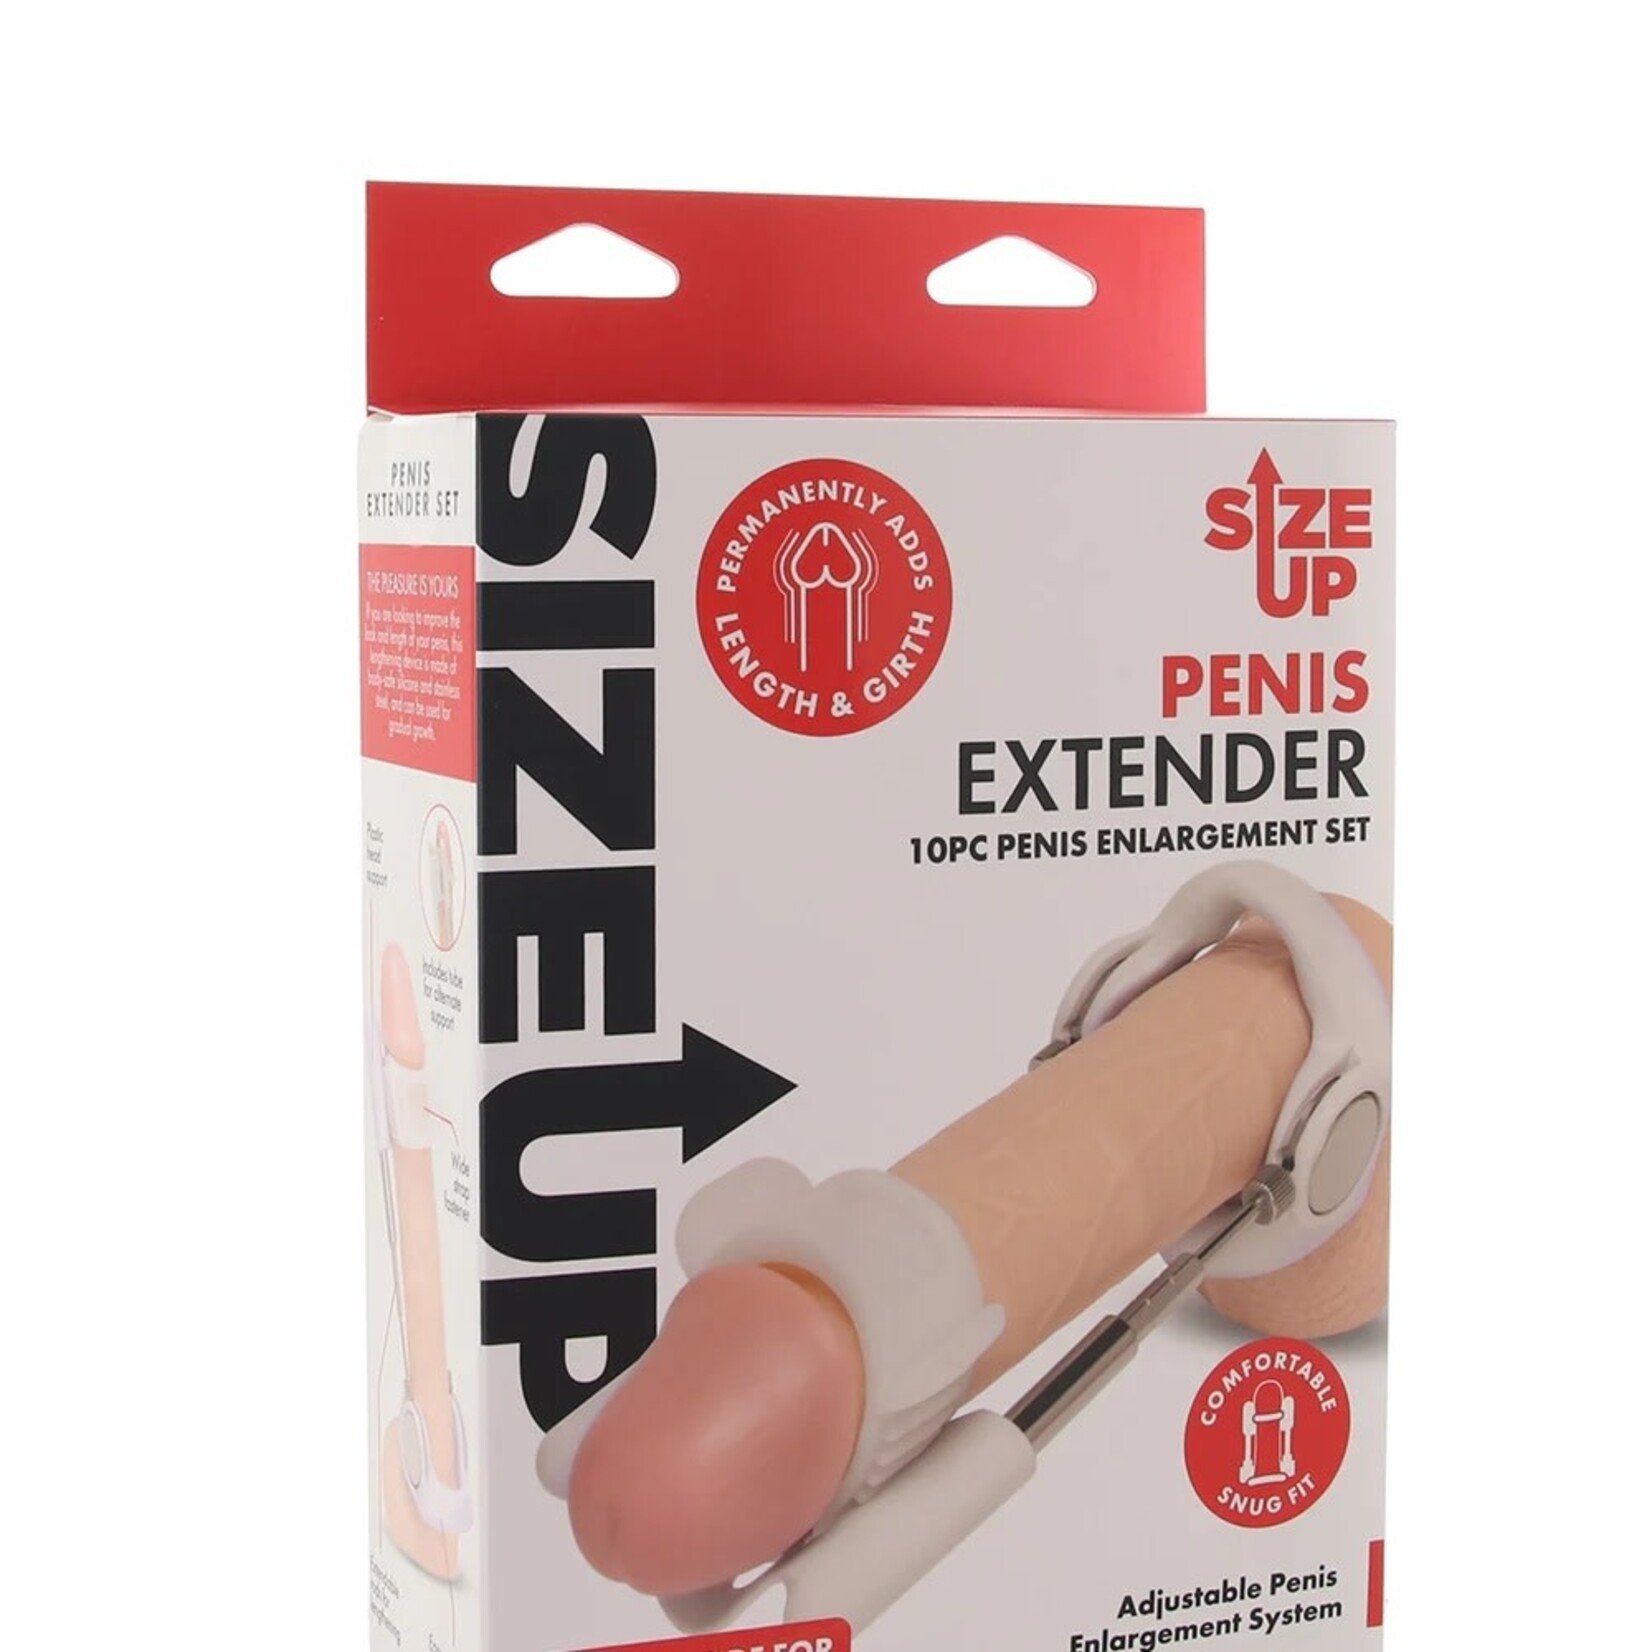 SIZE UP PENIS ENLARGEMENT SET IN WHITE